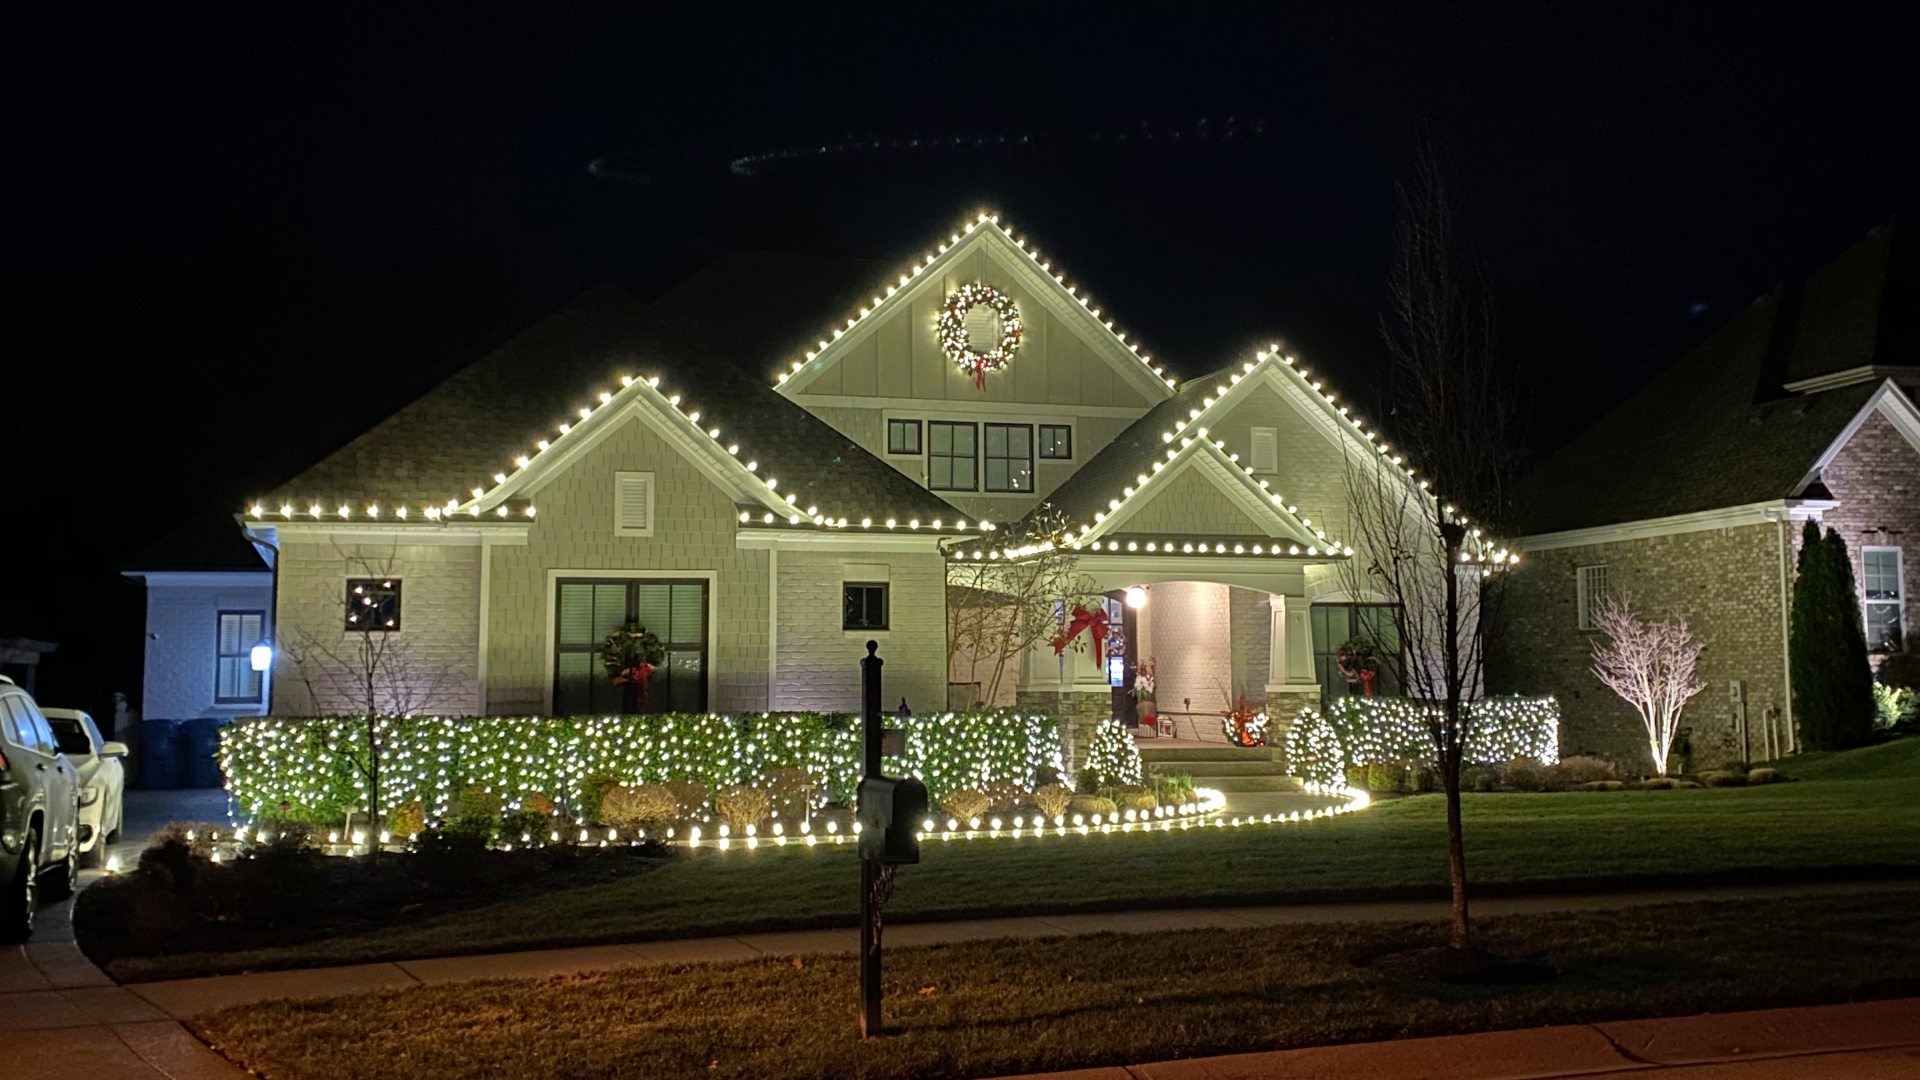 Holiday lighting installed around perimeter of home in Louisville, KY.